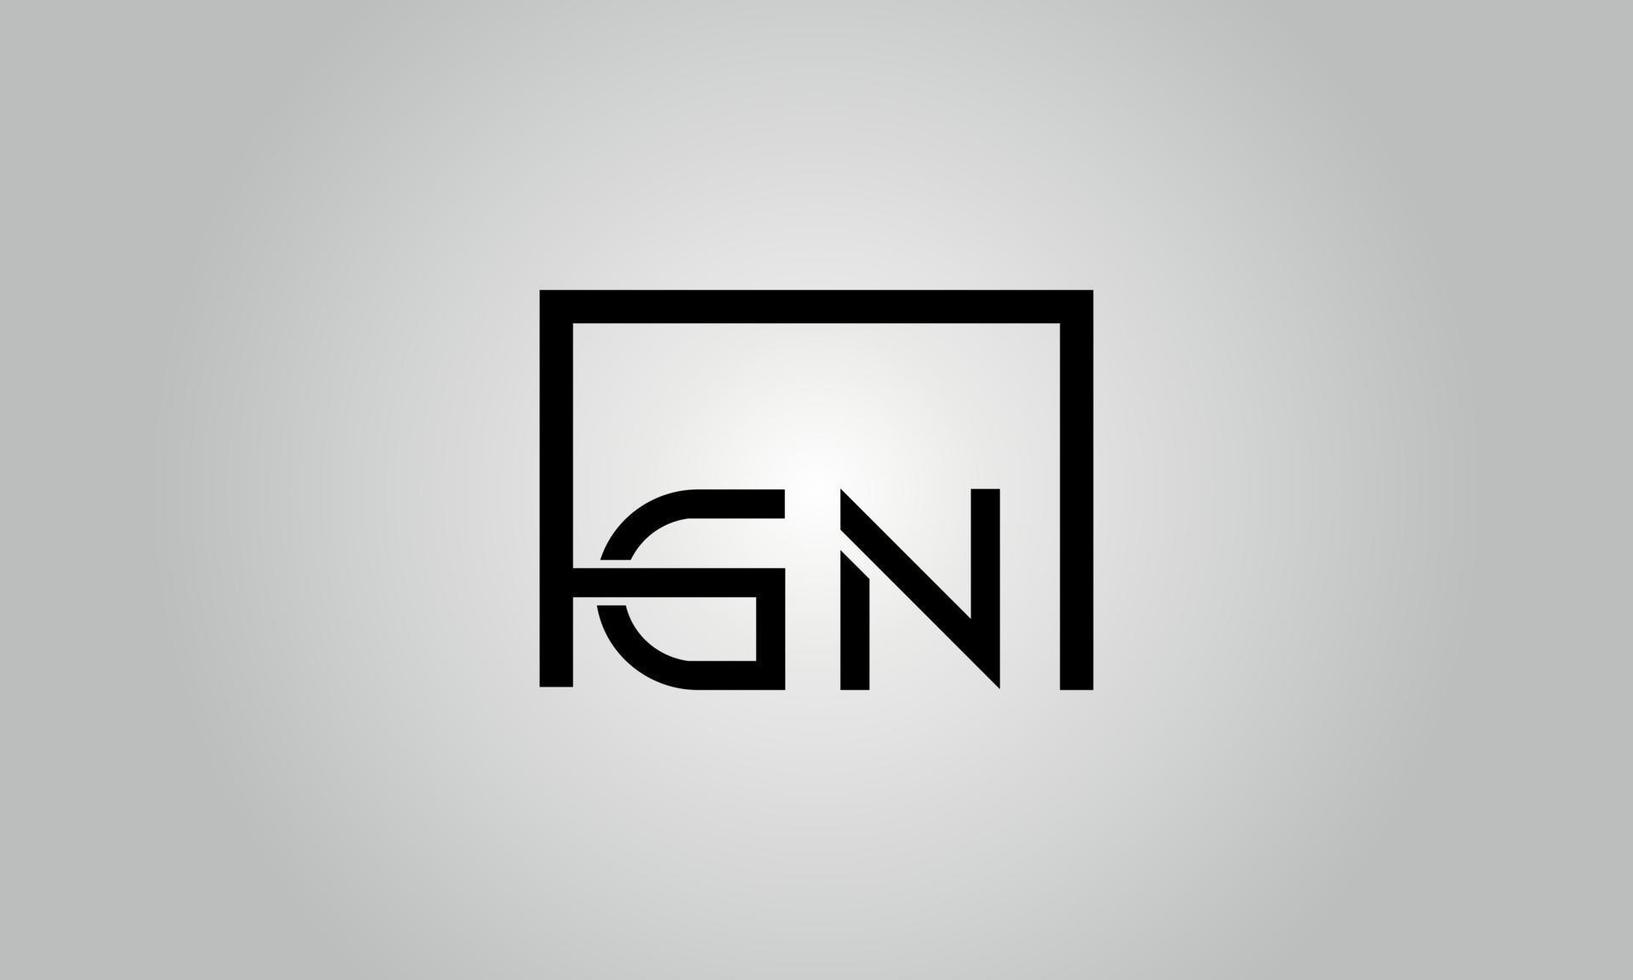 Letter GN logo design. GN logo with square shape in black colors vector free vector template.